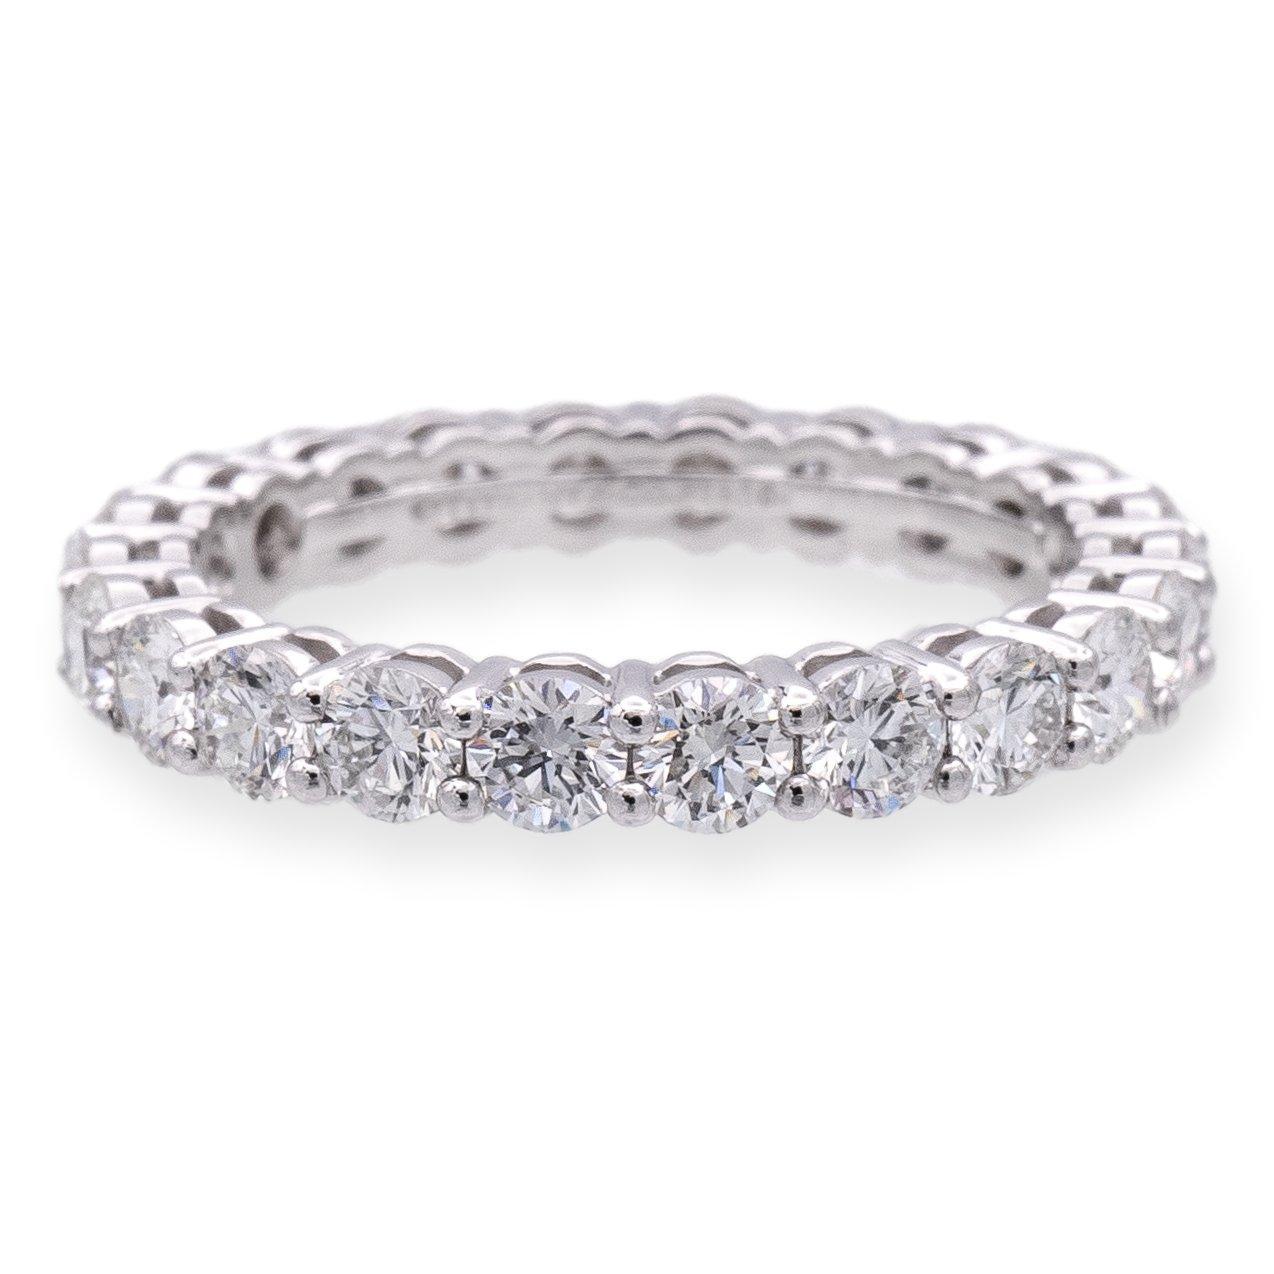 Tiffany & Co. Platinum Full Circle Diamond Ring from the iconic Forever Collection. Impeccably handcrafted in platinum boasting a full circle of scintillating round brilliant-cut diamonds, elegantly set in shared prongs, totaling a dazzling 1.80